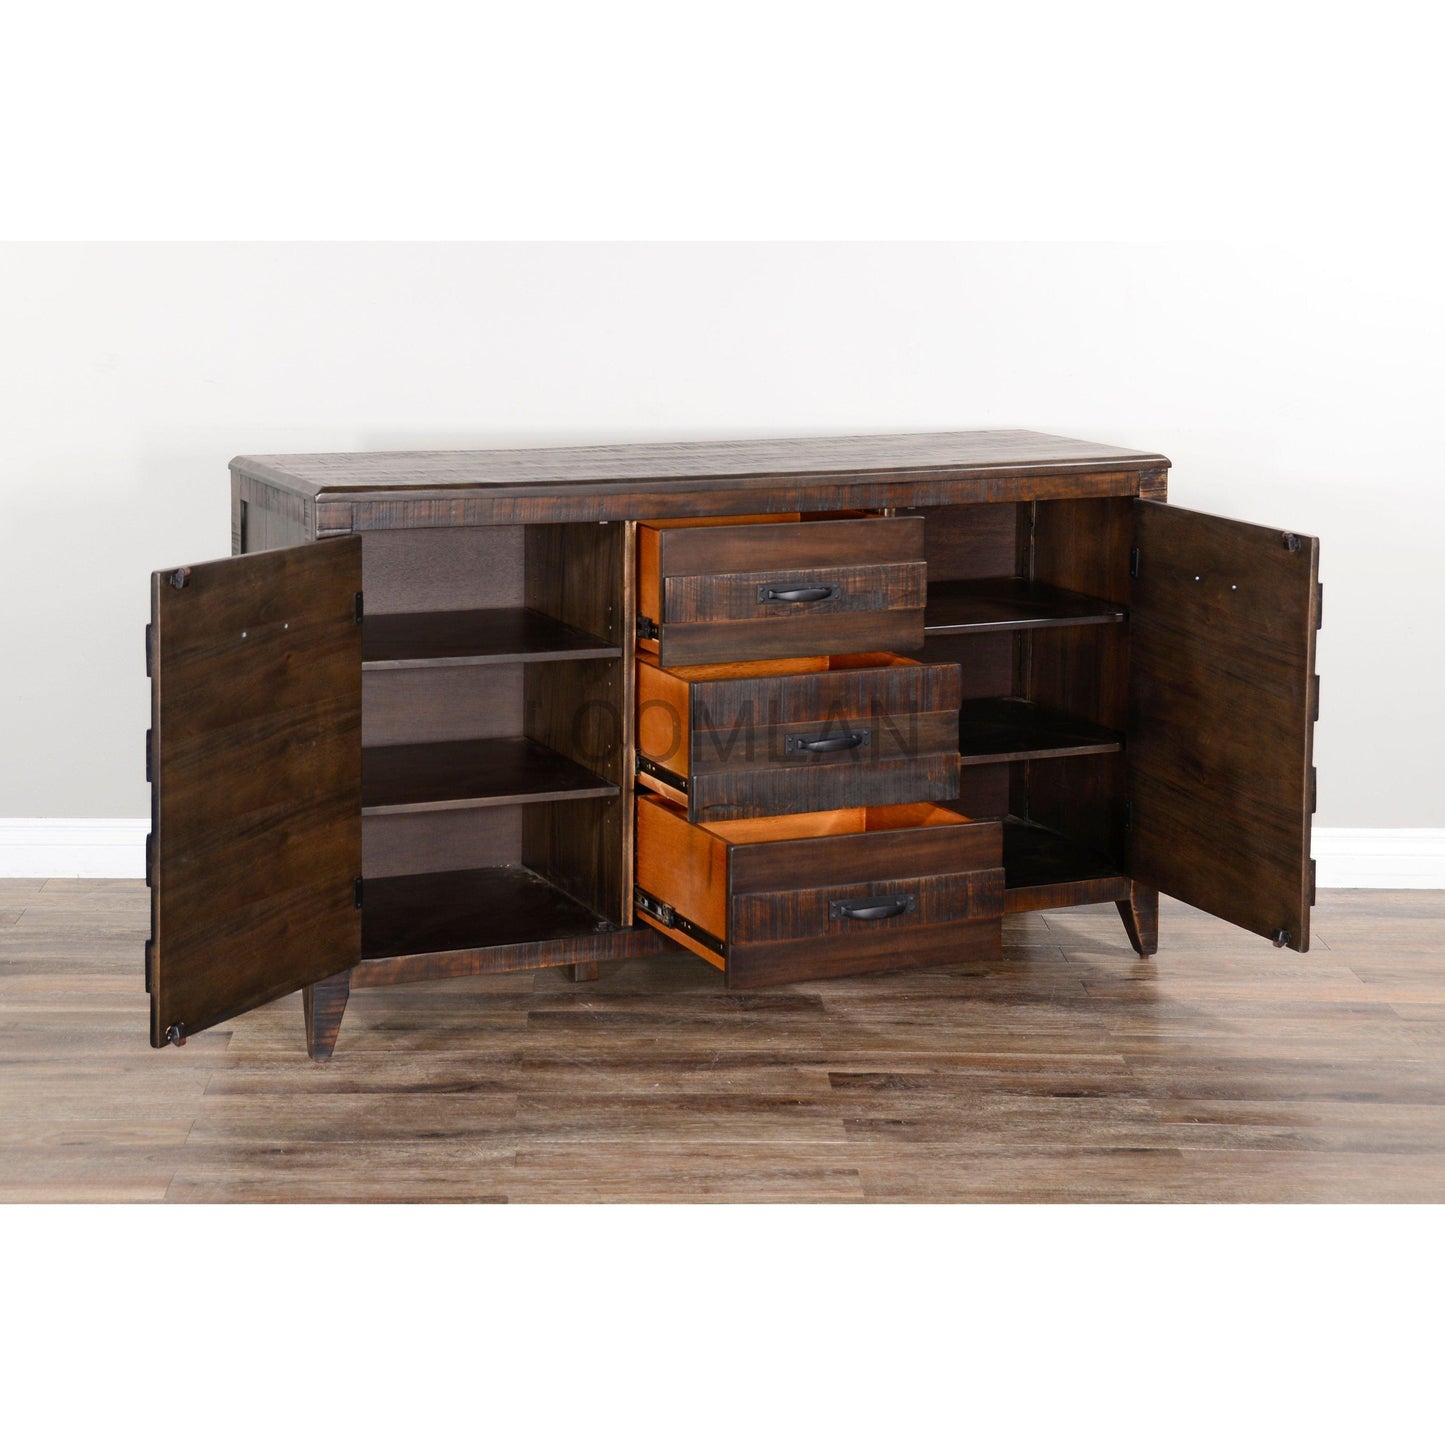 60" Dark Brown Wood Dining Server Buffet Sideboard With Drawers Sideboards Sideboards and Things By Sunny D